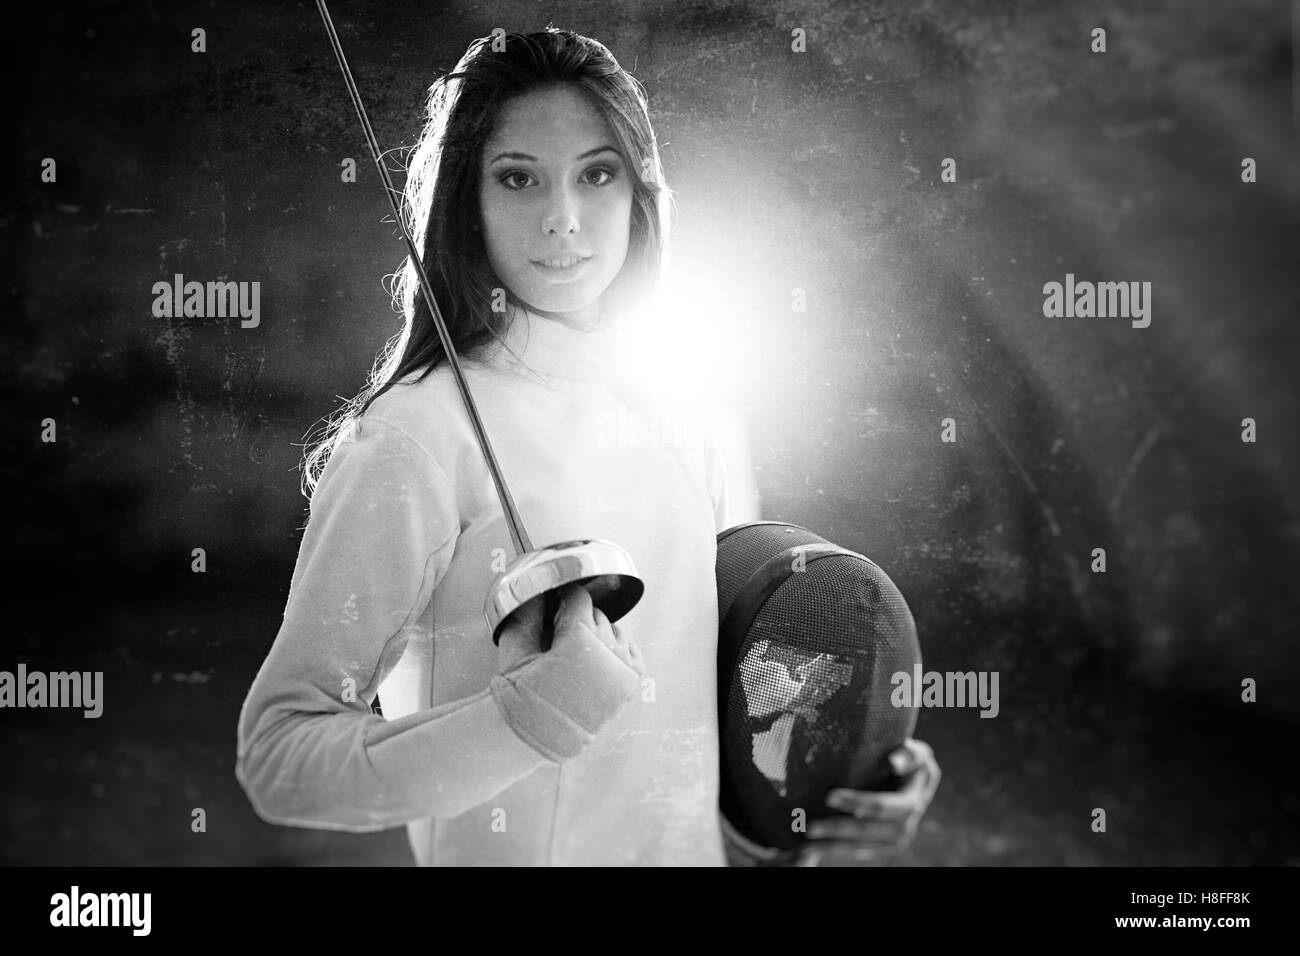 Indoor portrait of a young fencing professional. Stock Photo